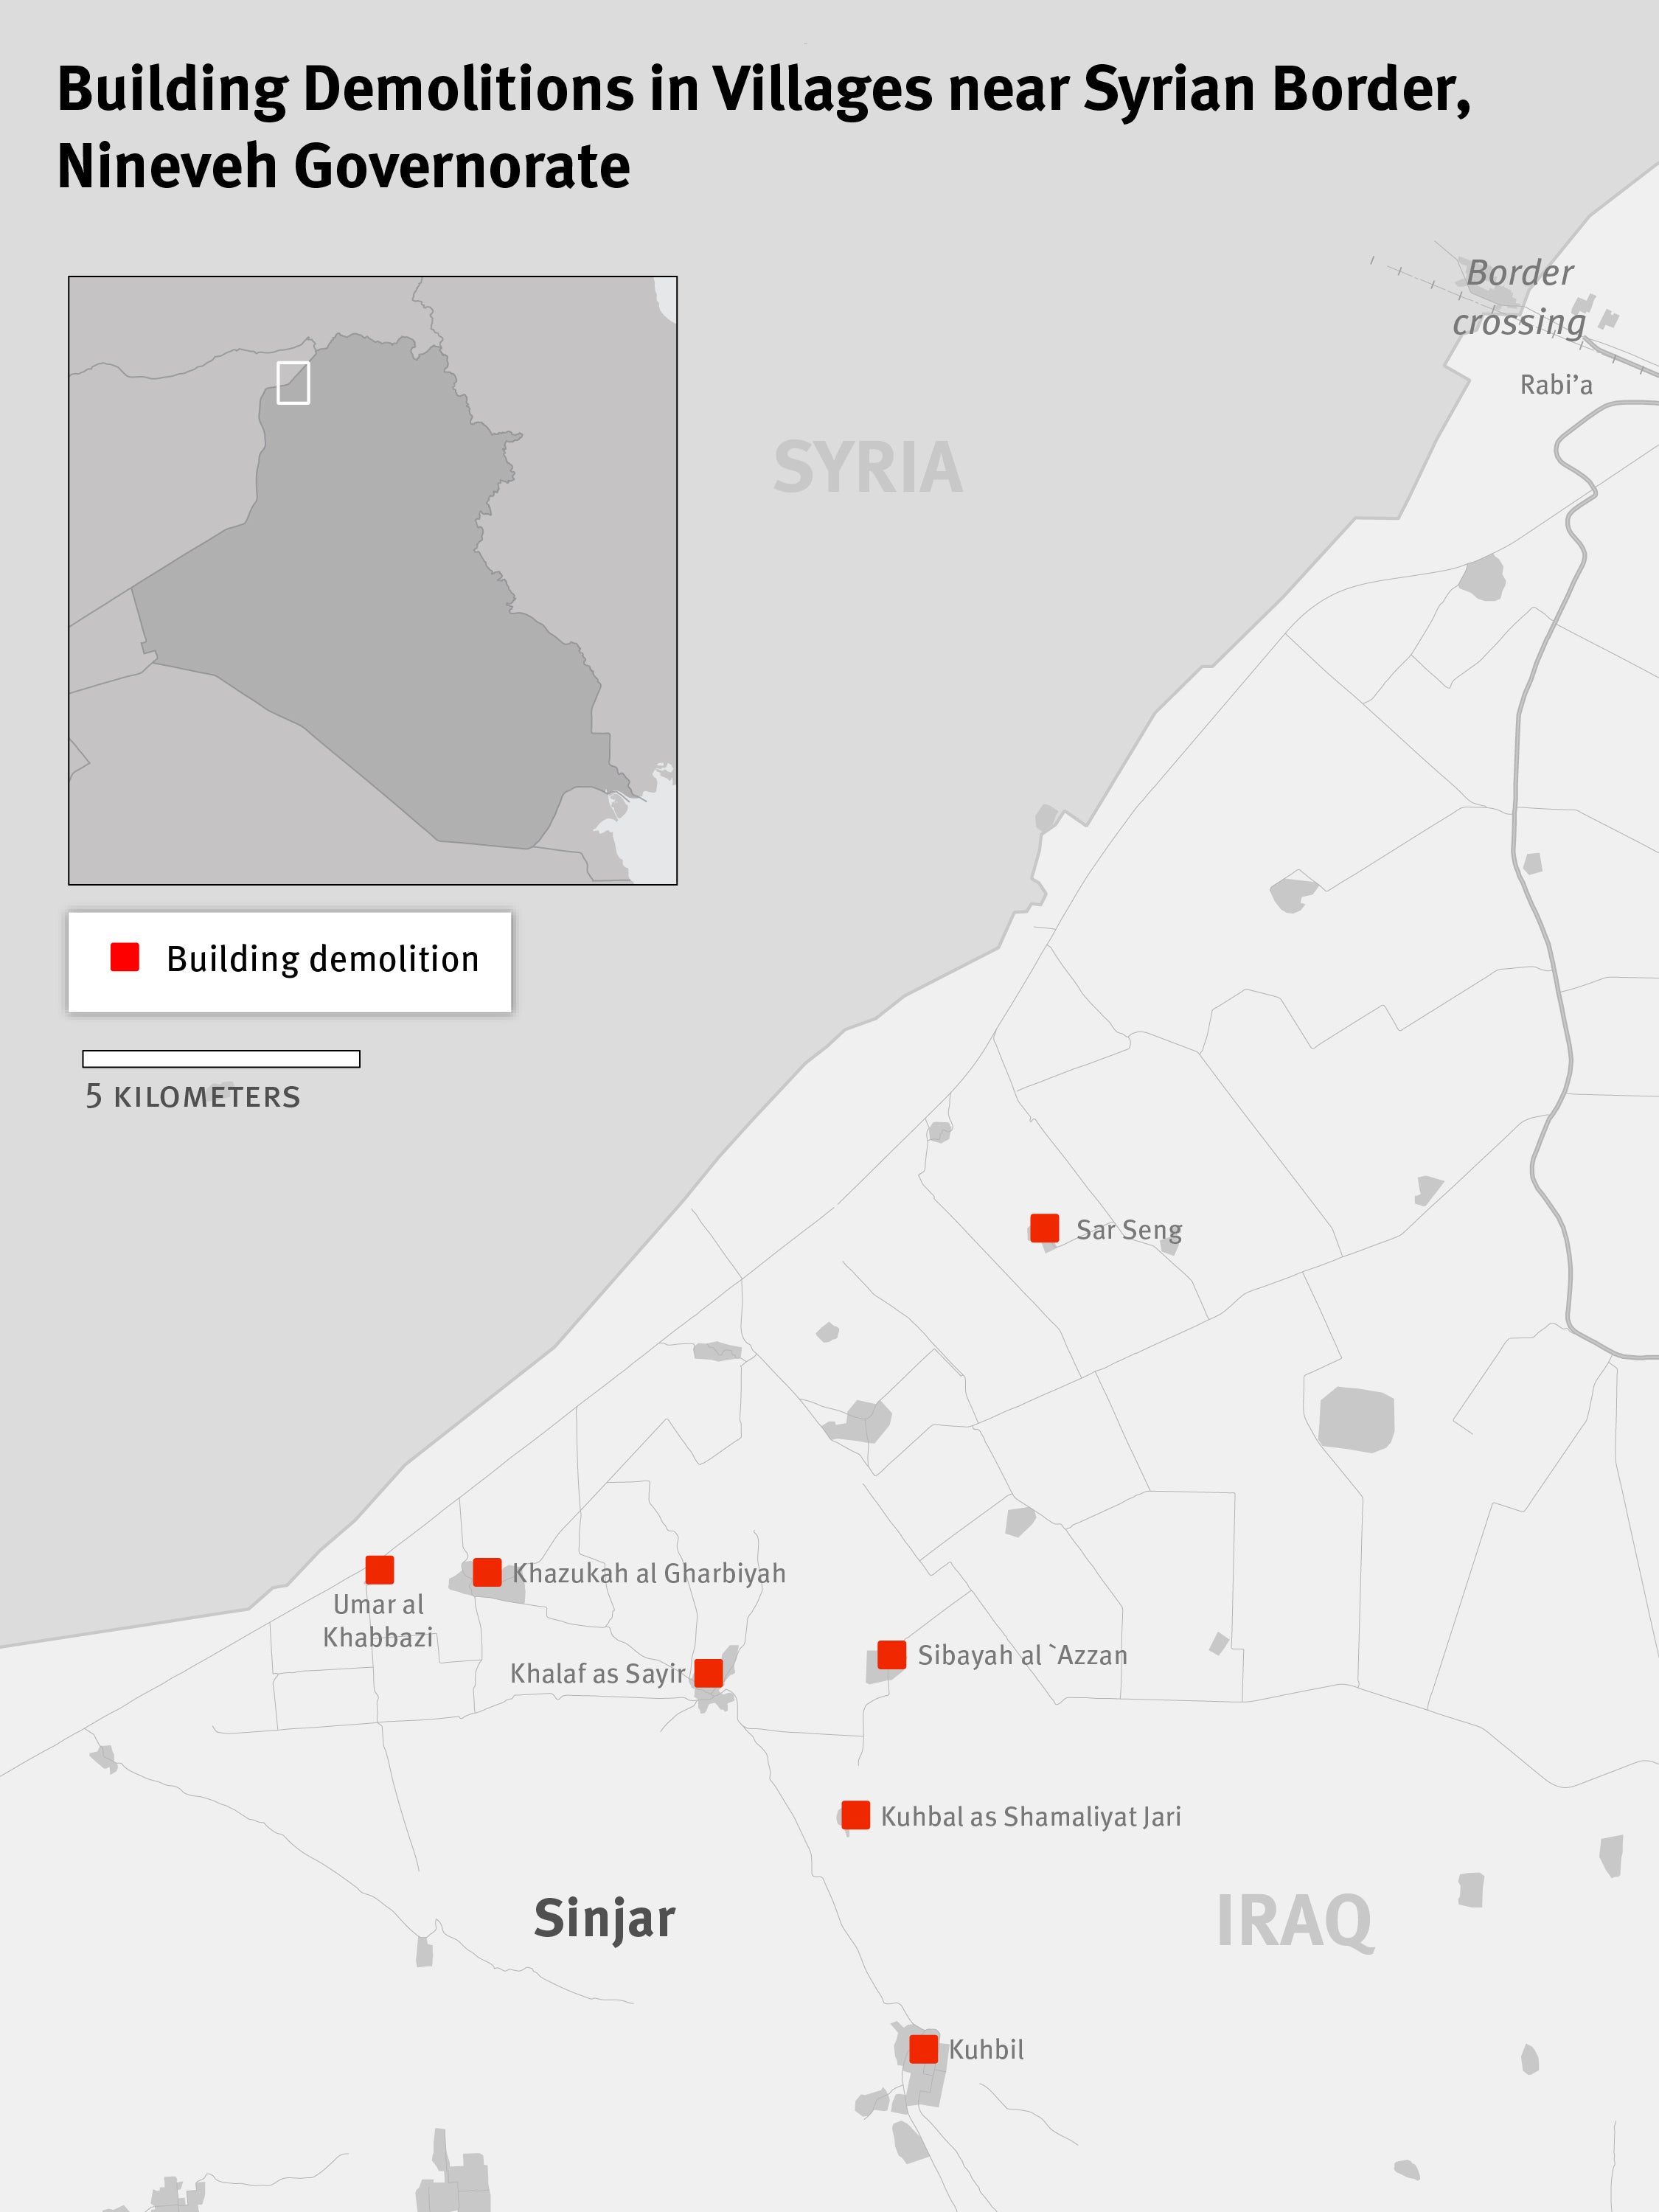 Map of Building Demolitions in Villages near the Syrian Border, Nineveh Governorate